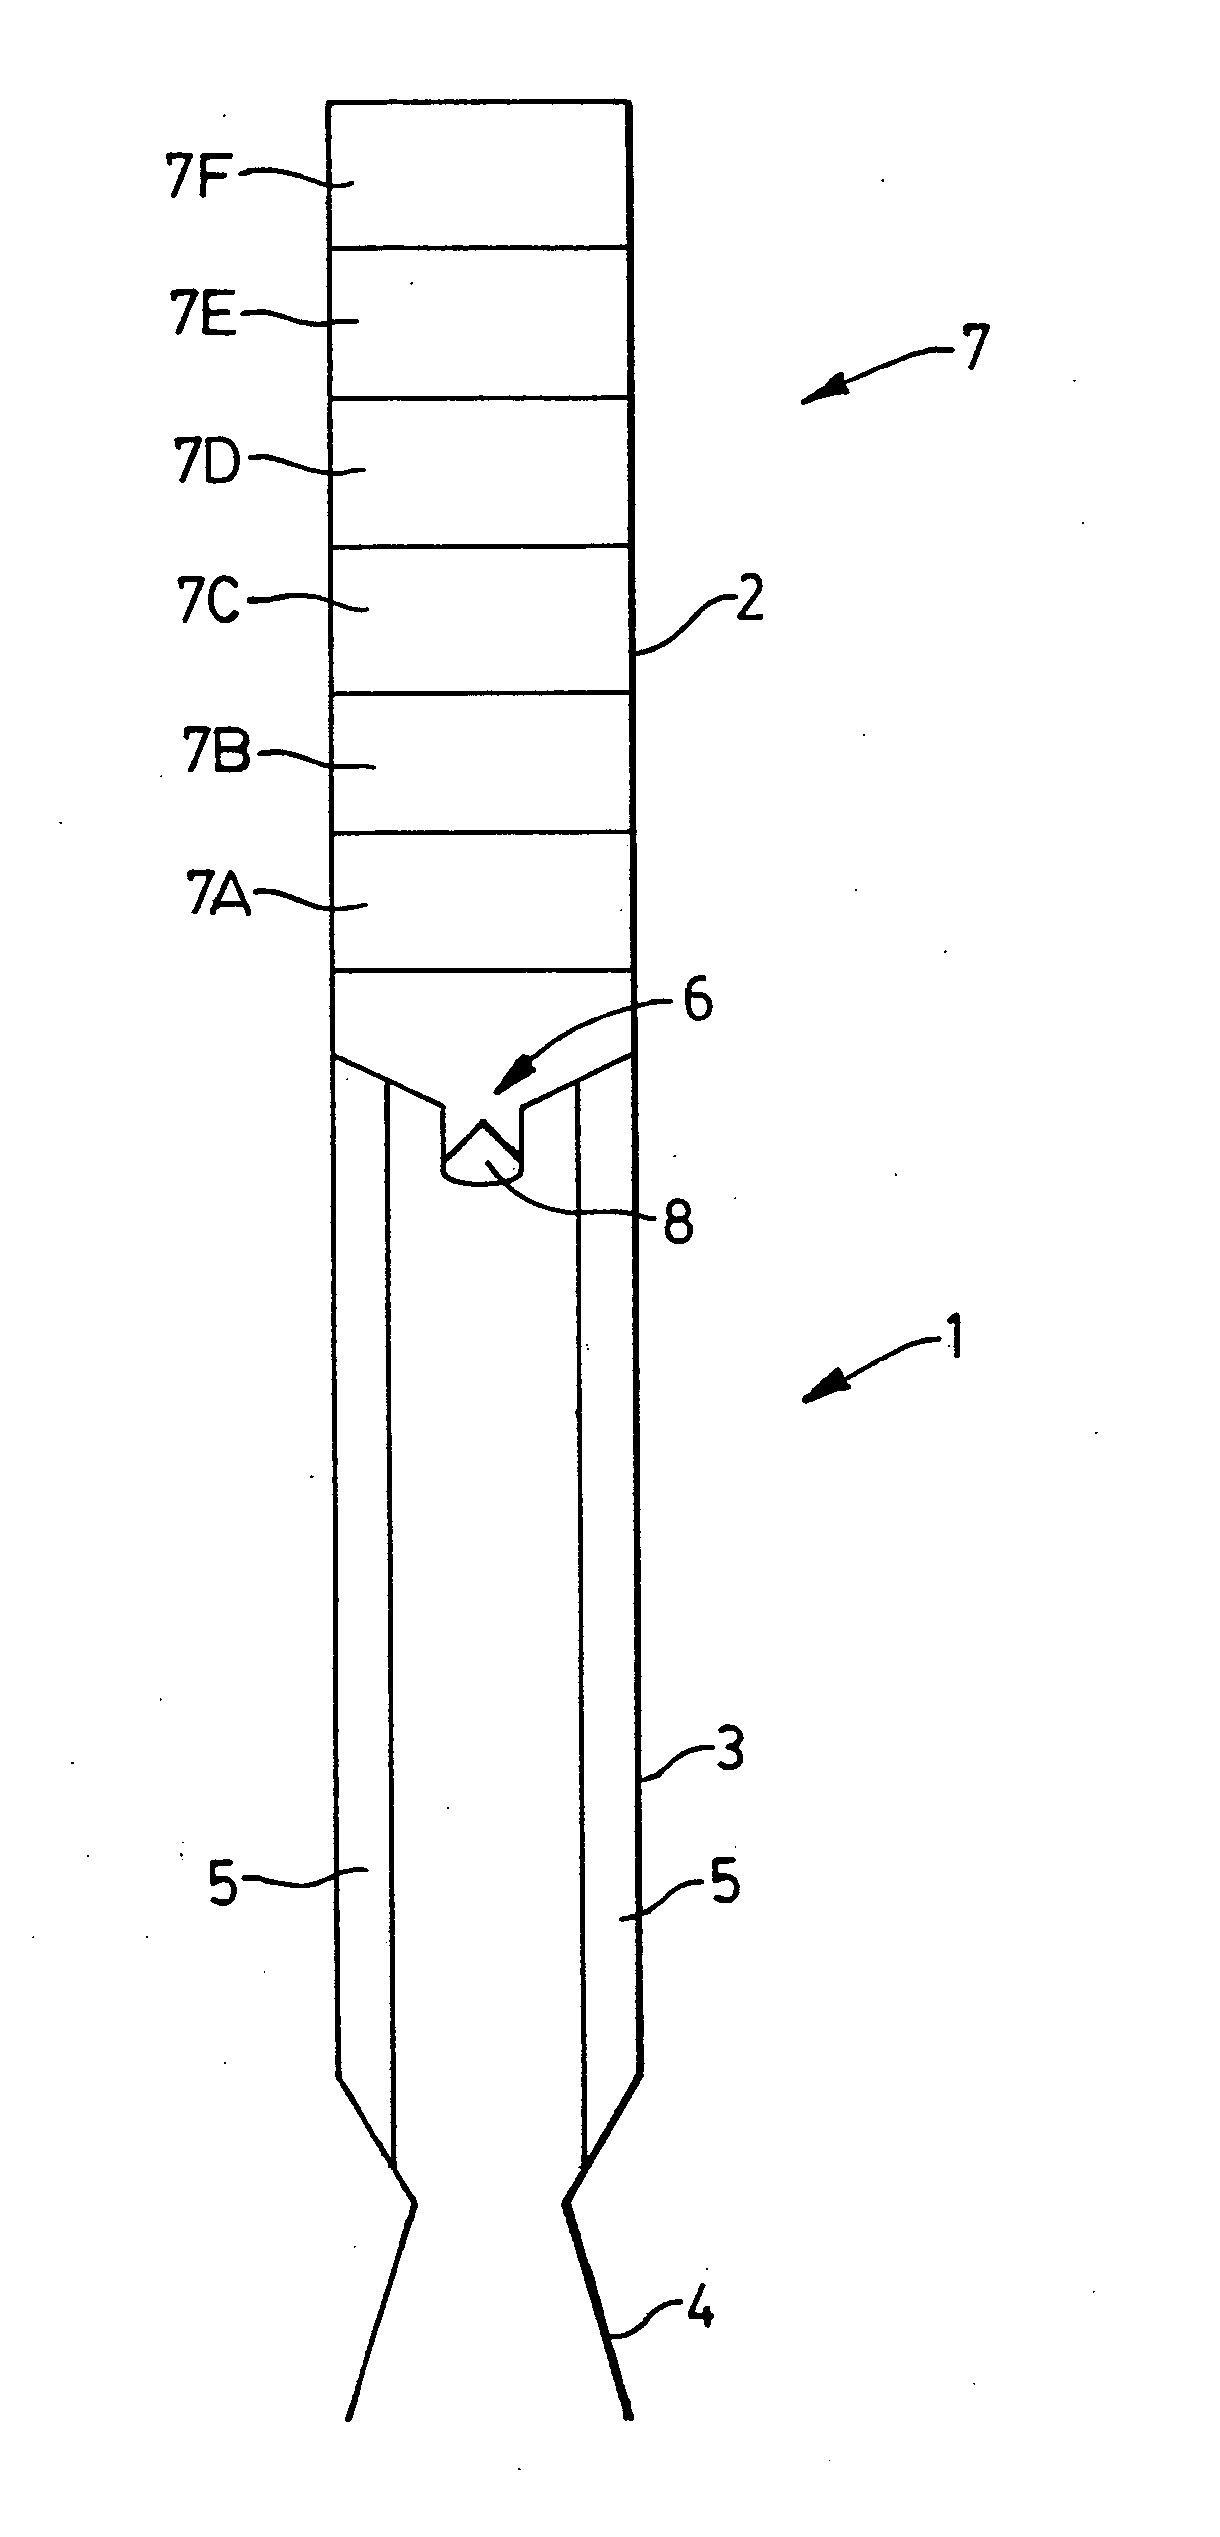 Oxidizer package for propellant system for rockets